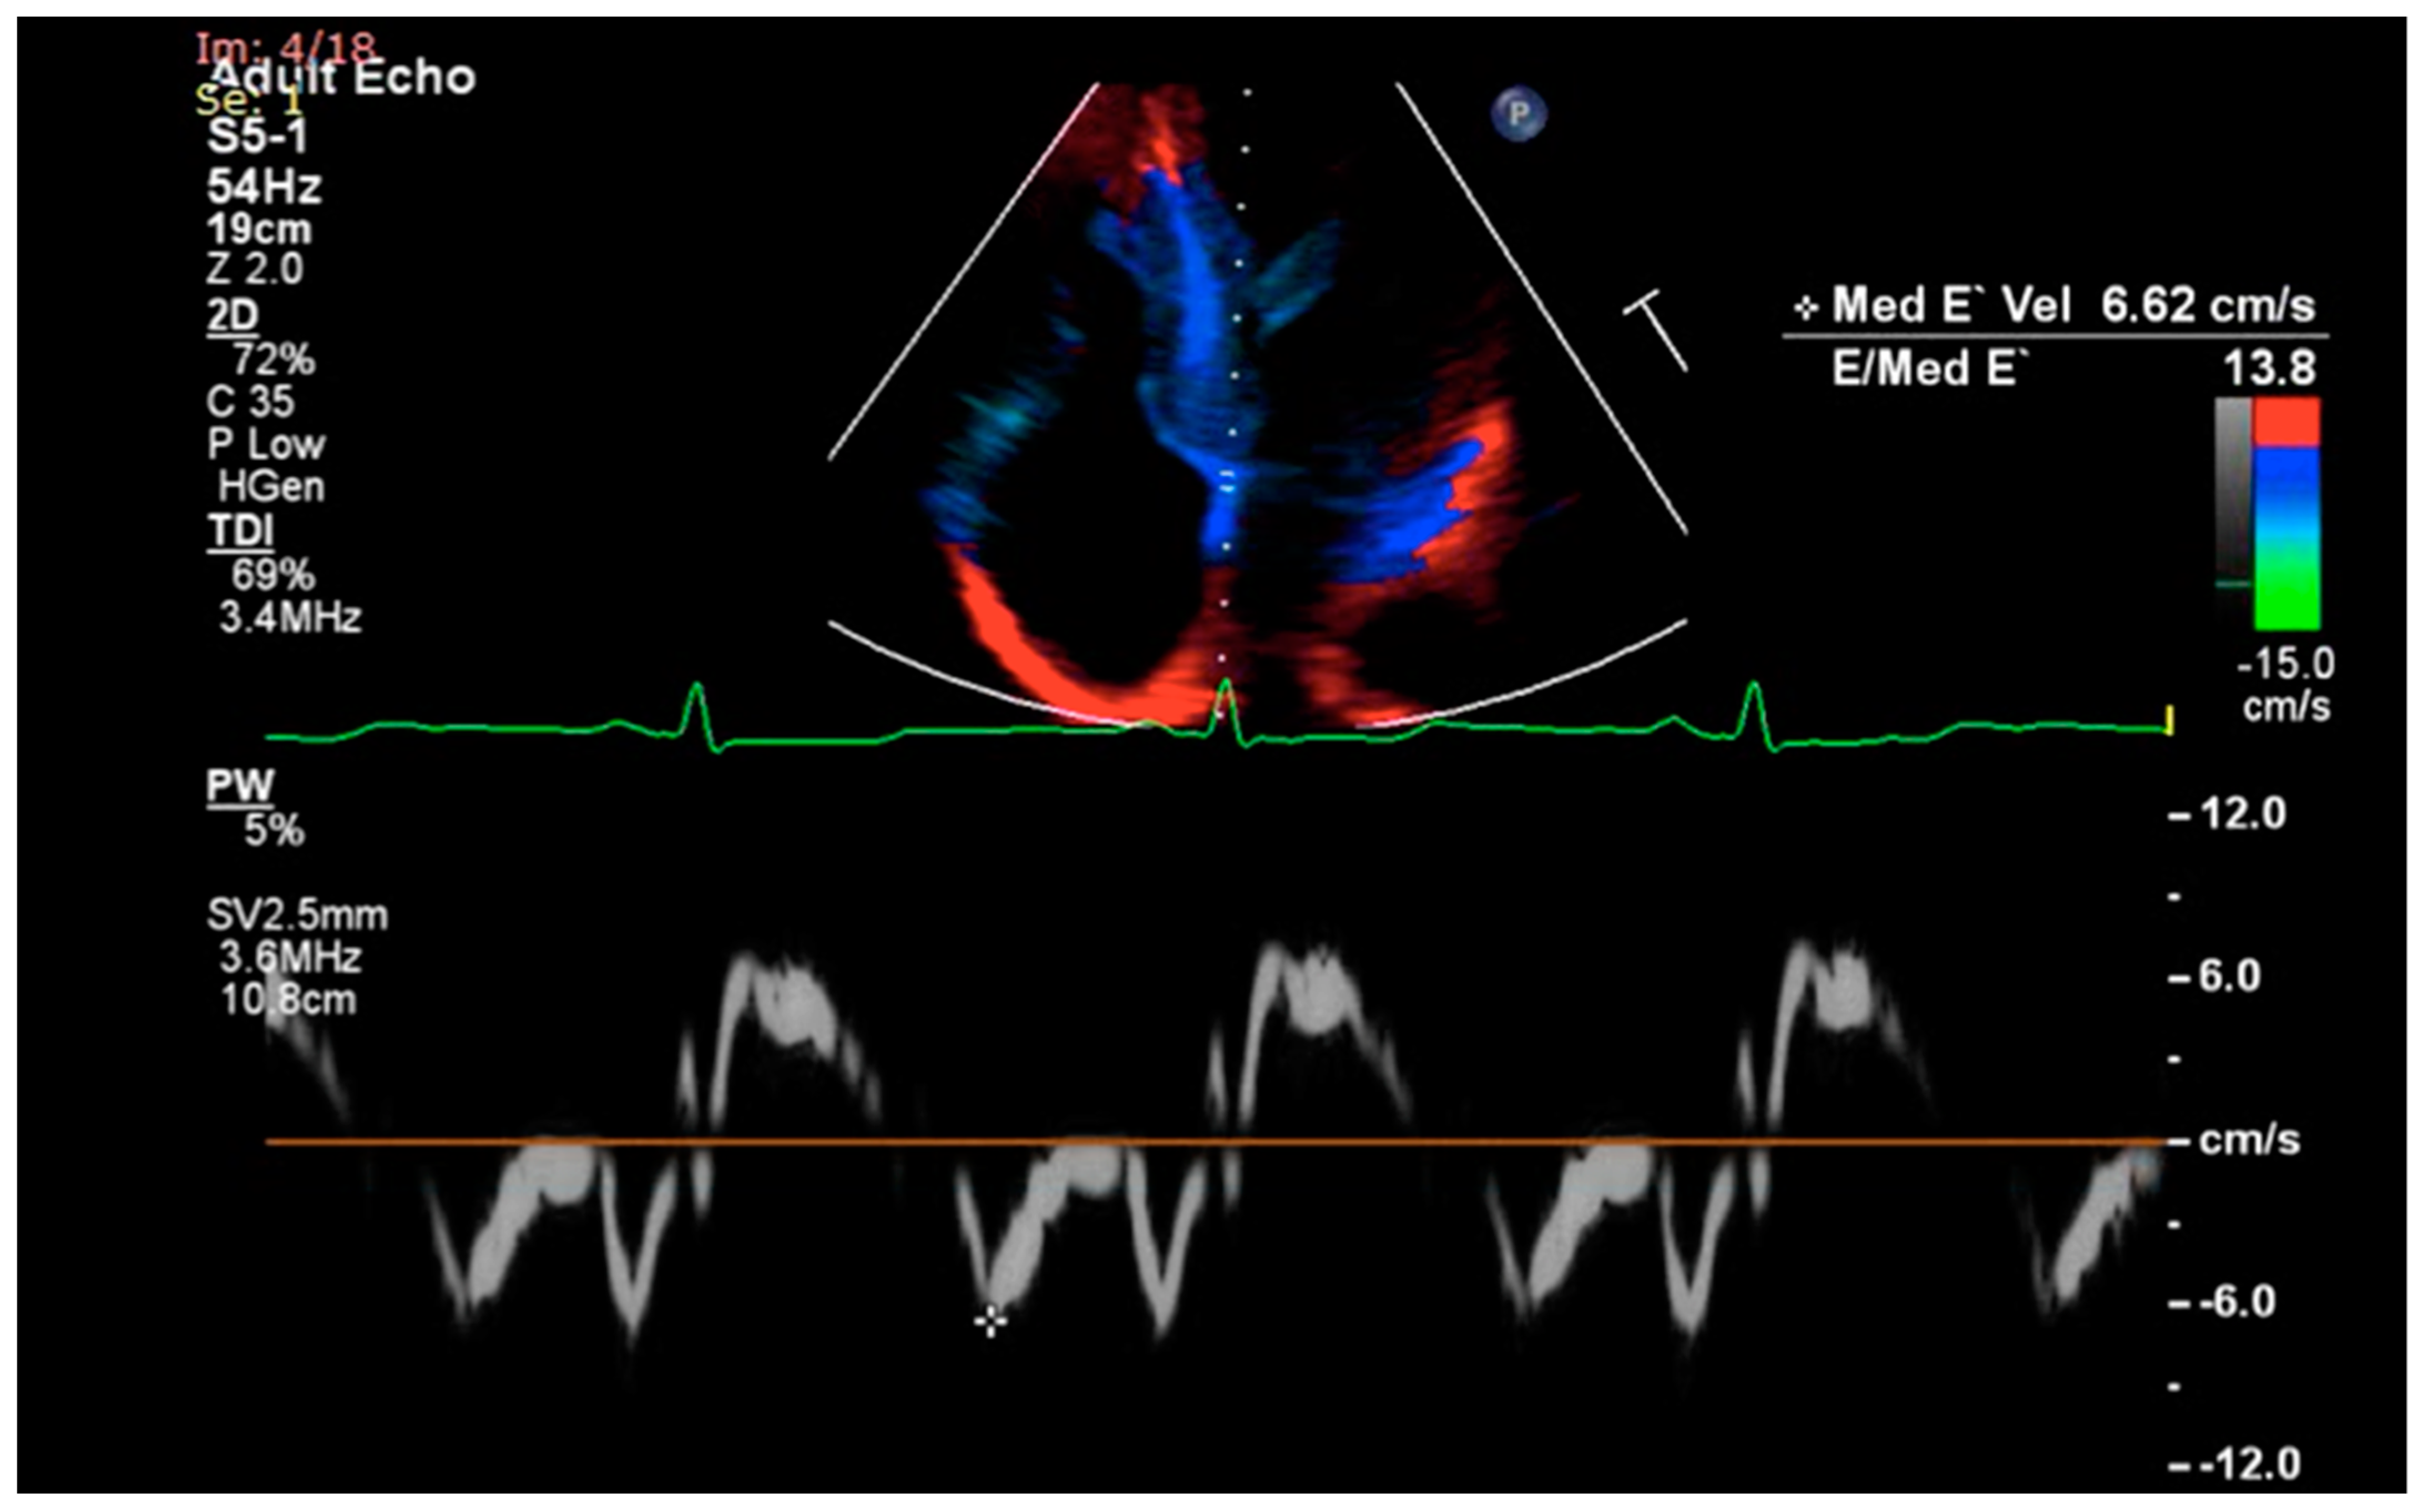 2D/3D strain analysis in a patient with cardiac amyloidosis. Upper